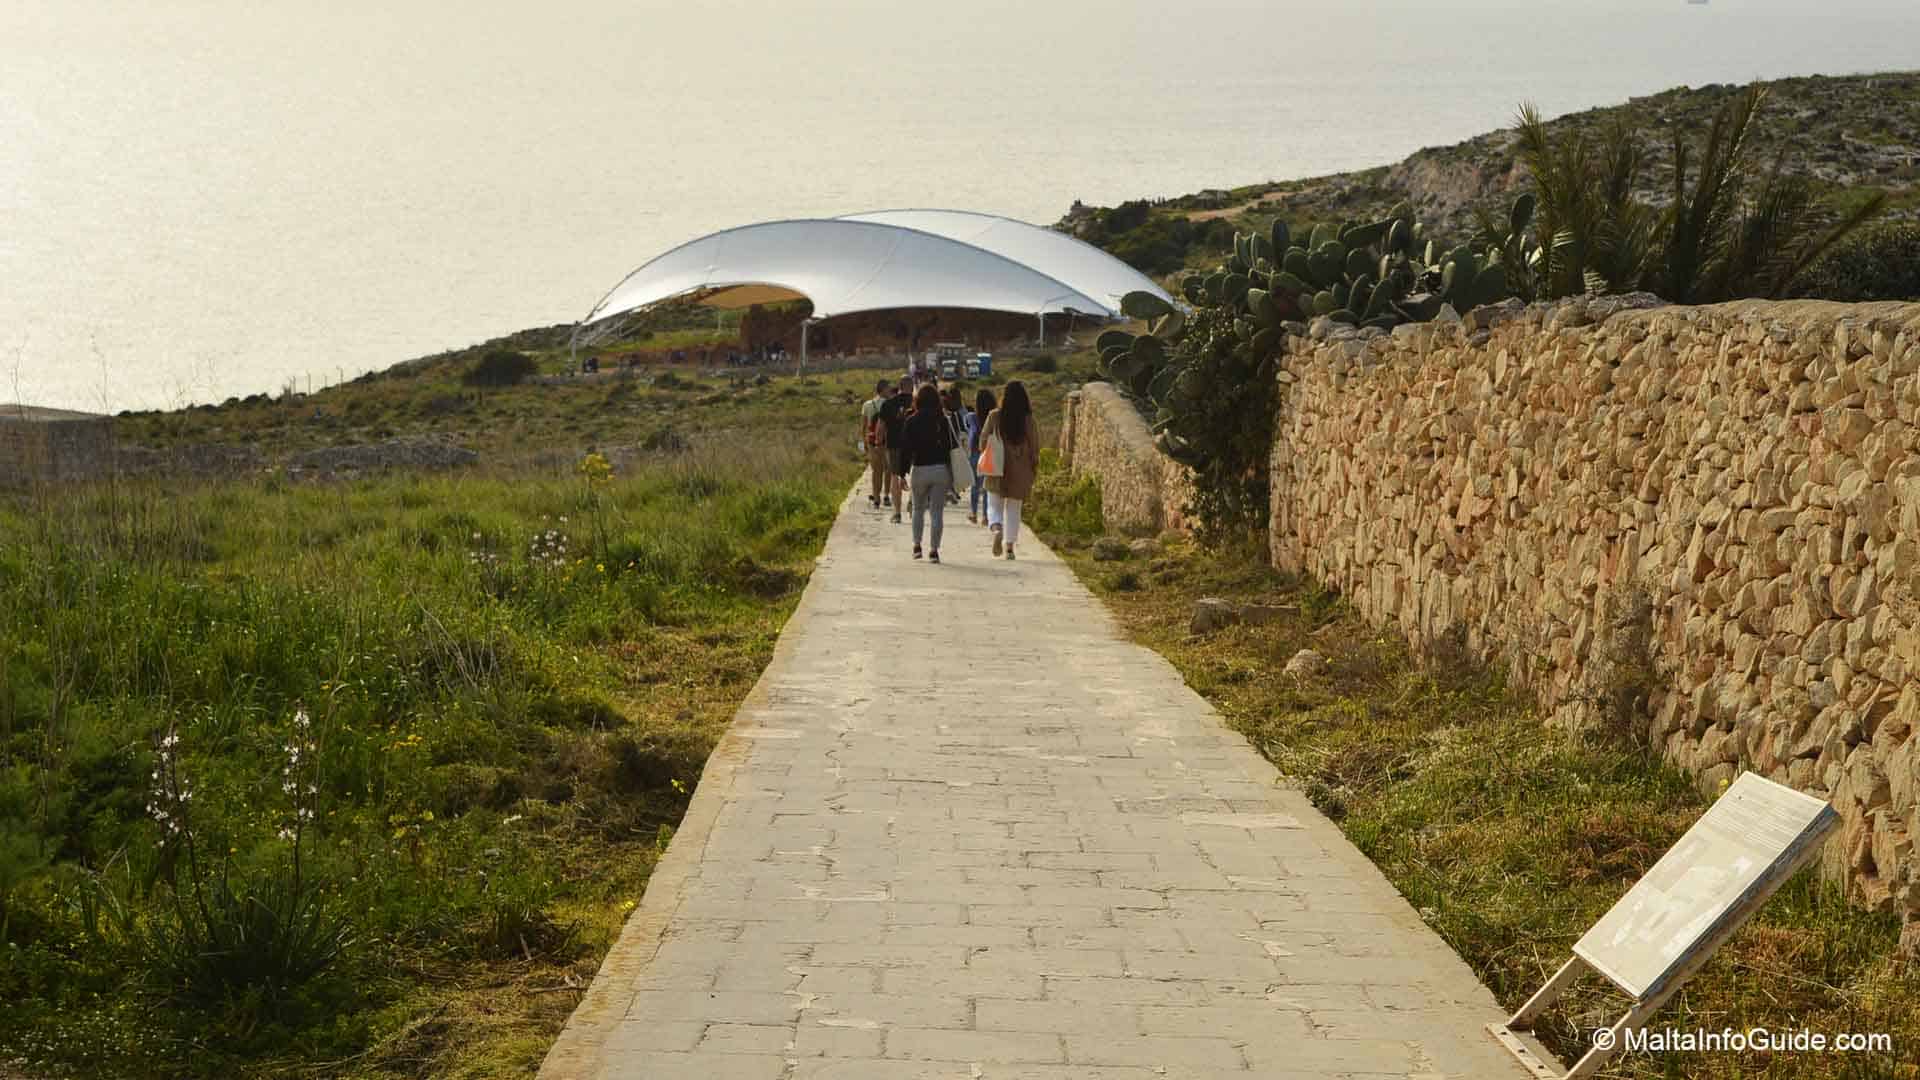 People walking down the passage way to Mnajdra Temple